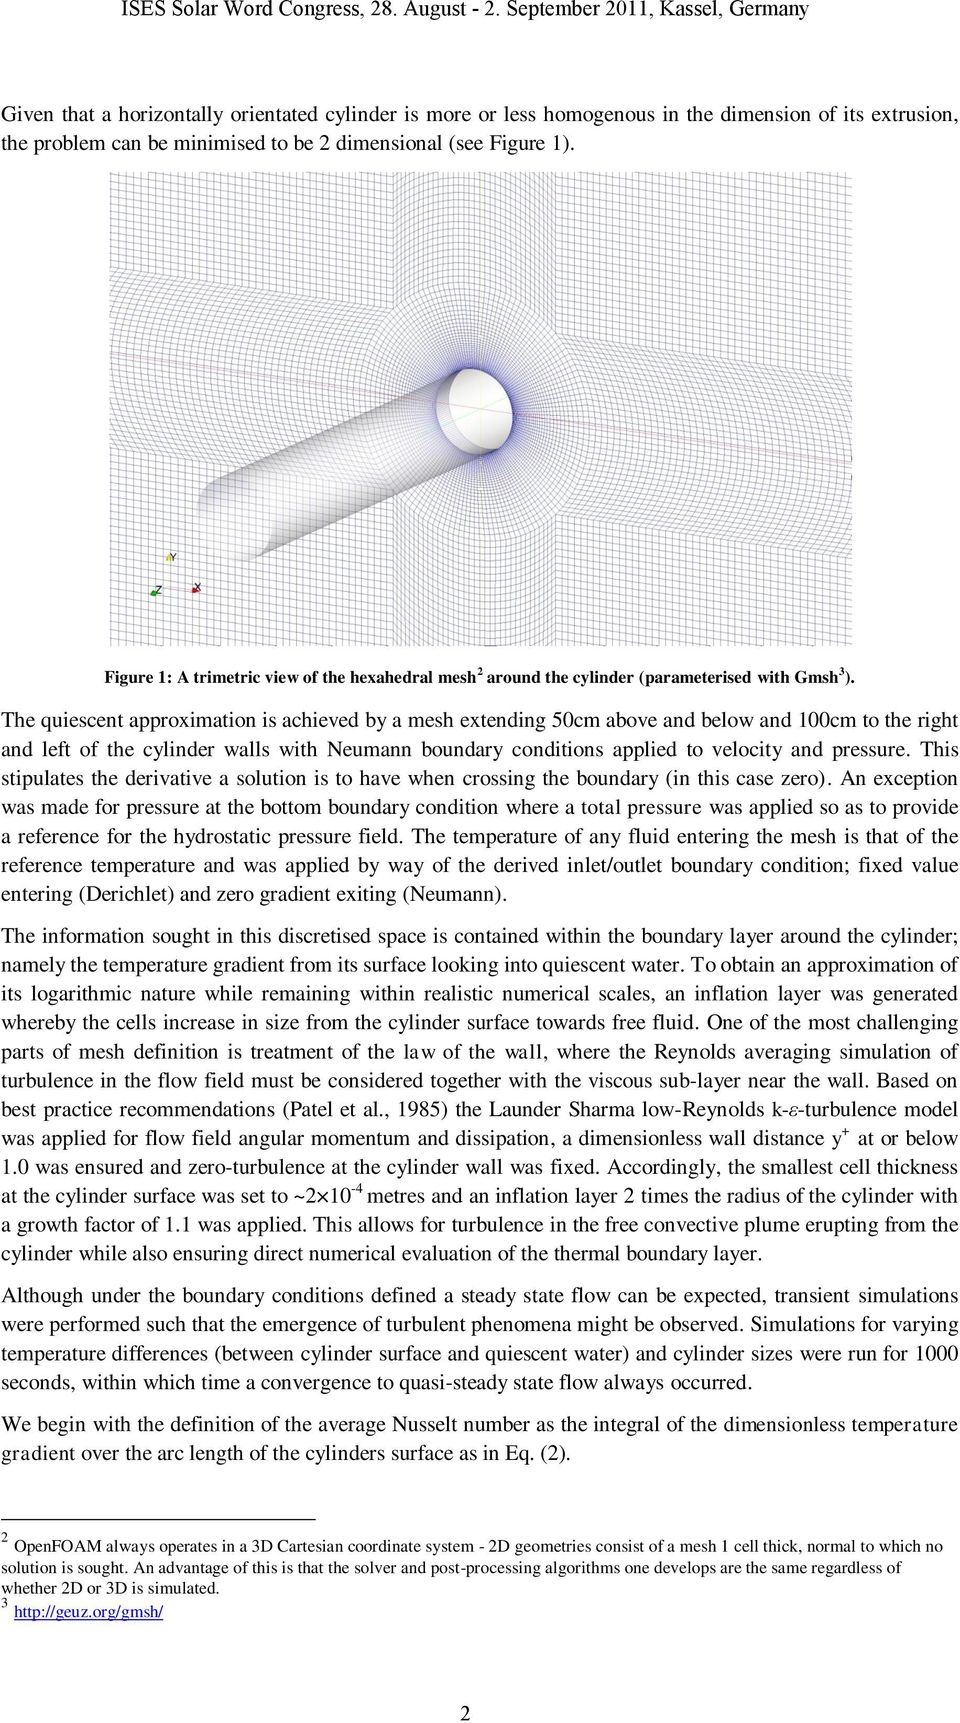 The quiescent approximation is achieved by a mesh extending 50cm above and below and 100cm to the right and left of the cylinder walls with Neumann boundary conditions applied to velocity and